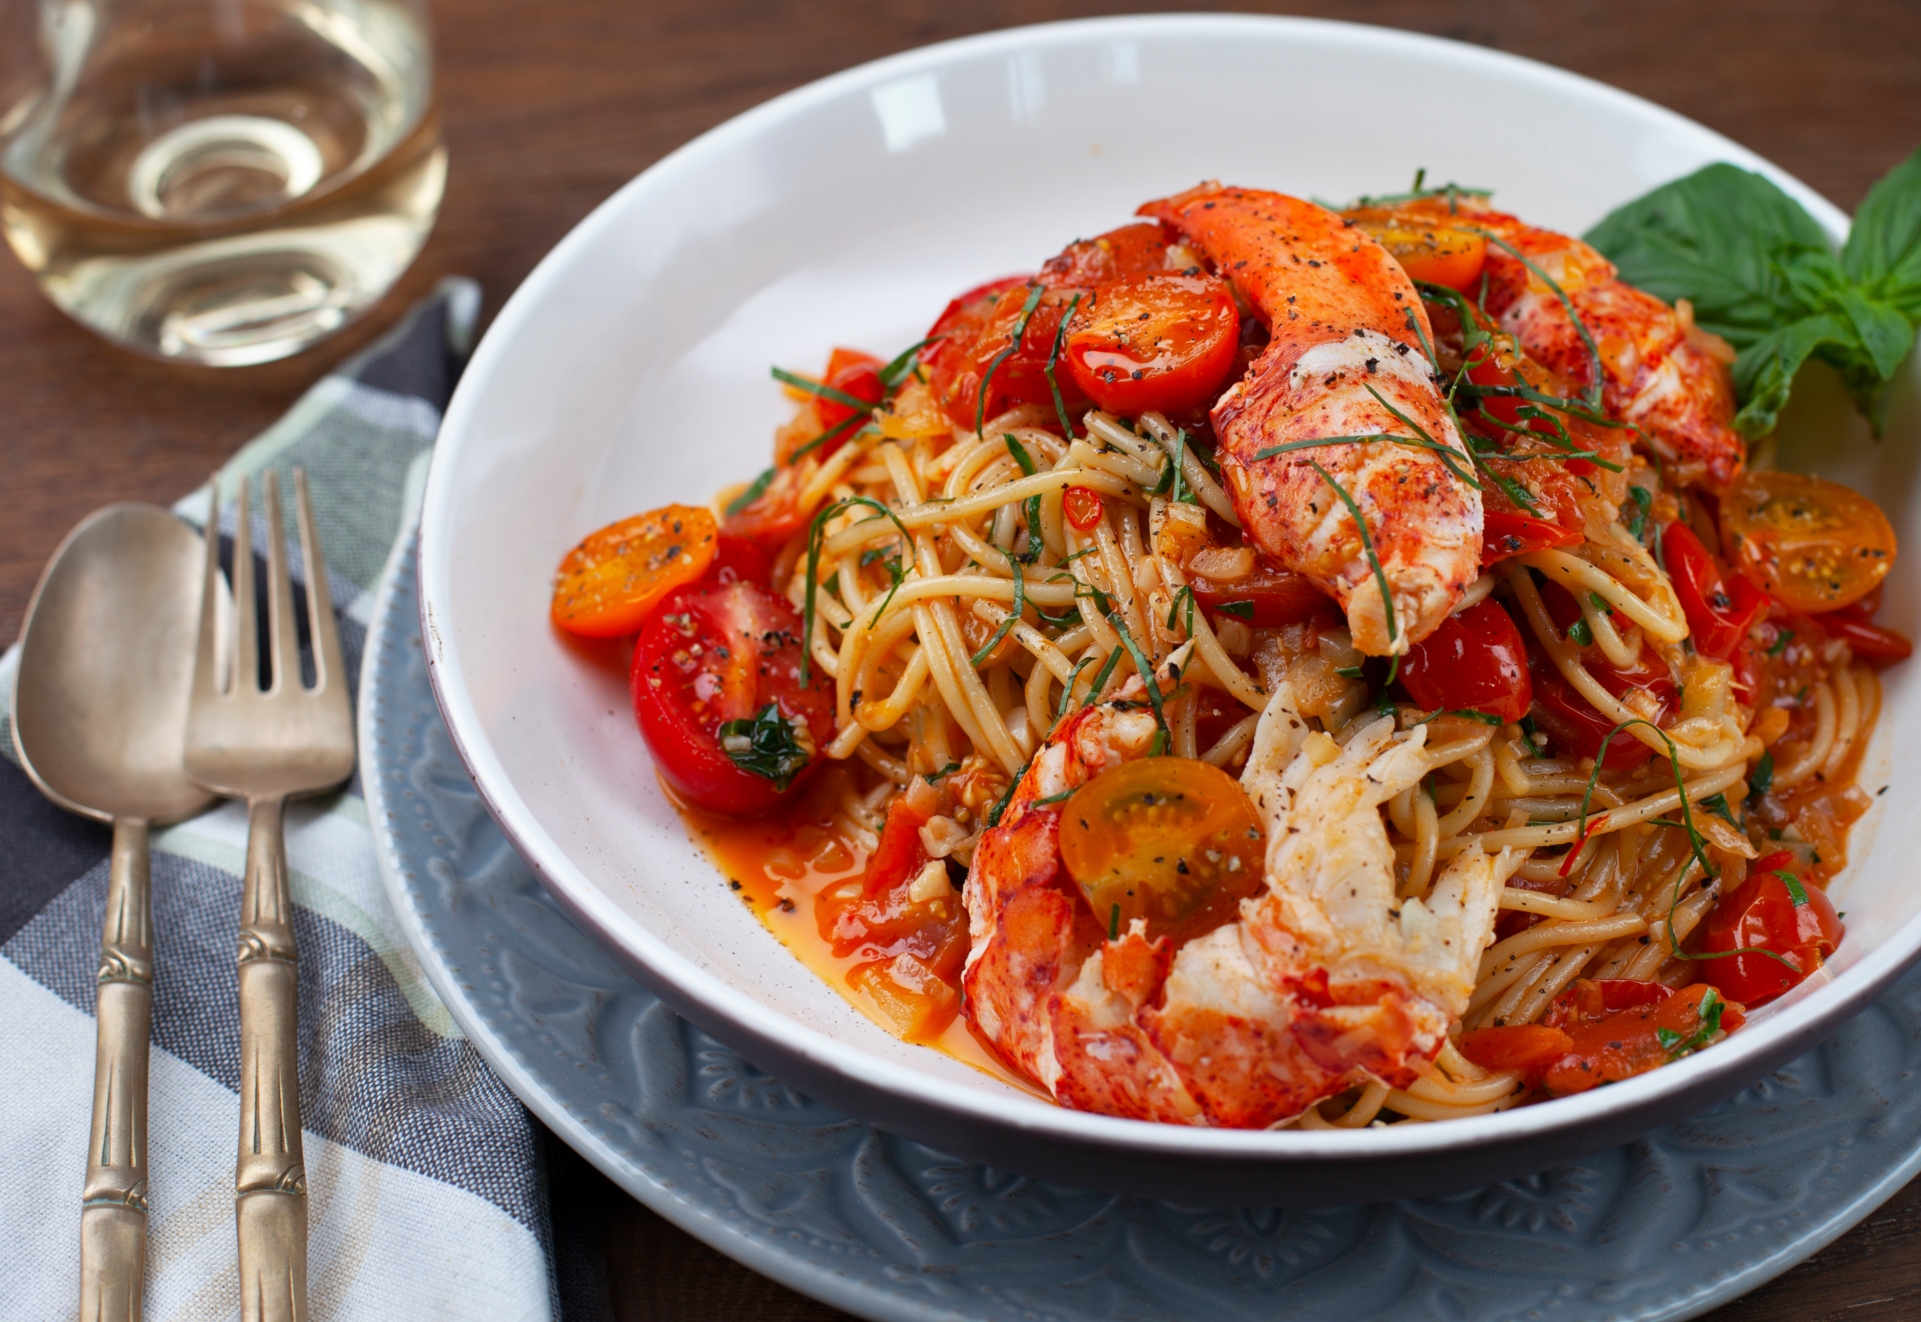 Lobster spaghetti with chili peppers, garlic, basil and tomatoes